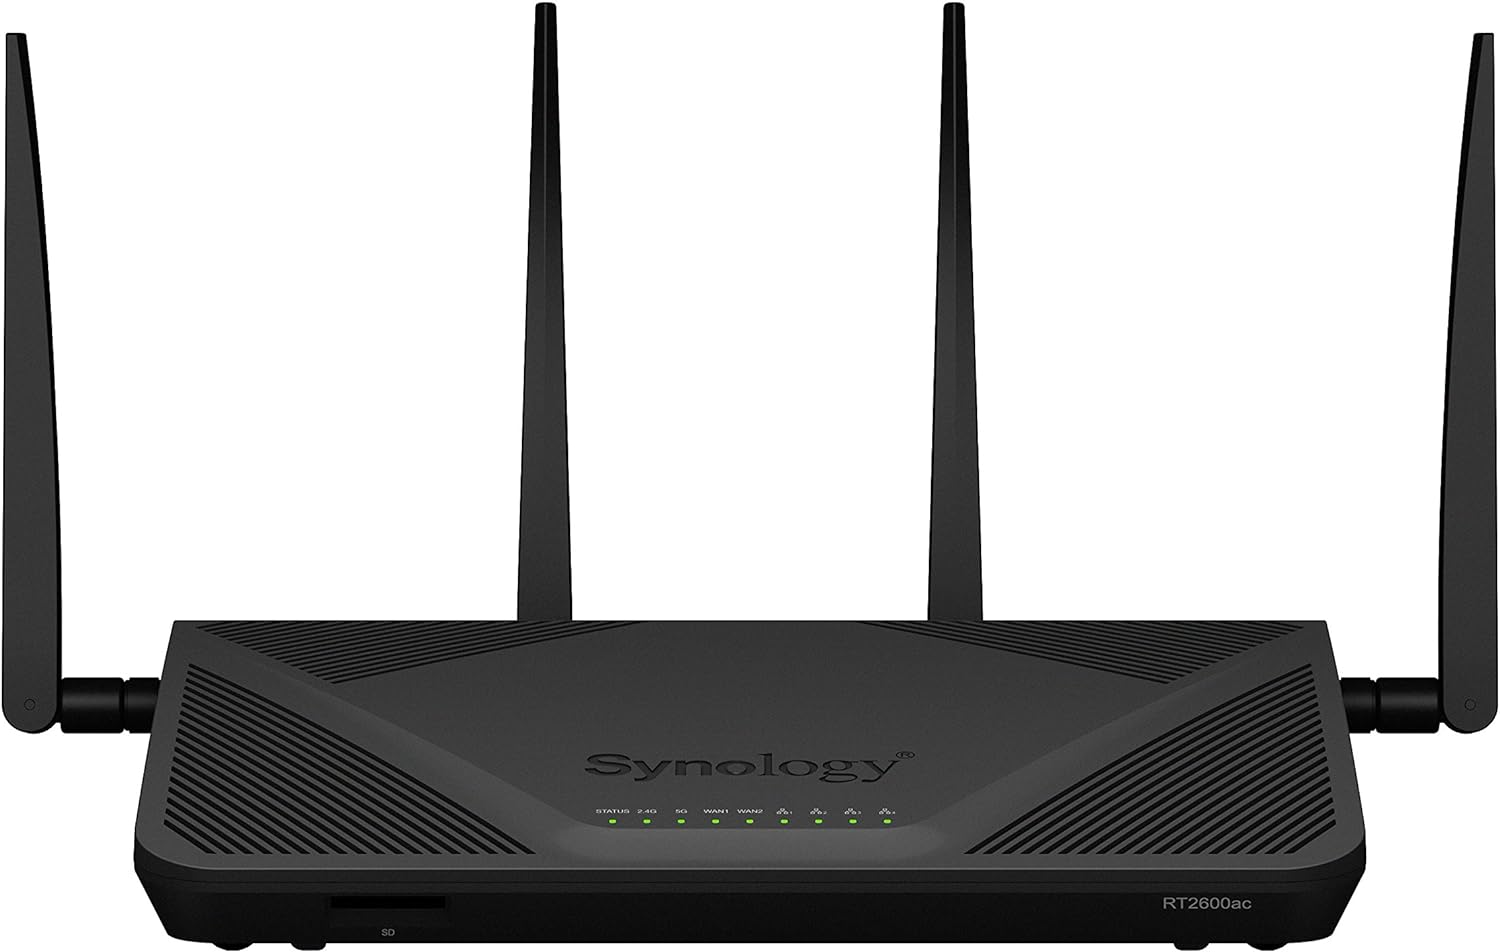 Synology RT2600AC Wireless Router, Dual Band AC, 4 x 10 100 1000 Mbps, USB, card slot